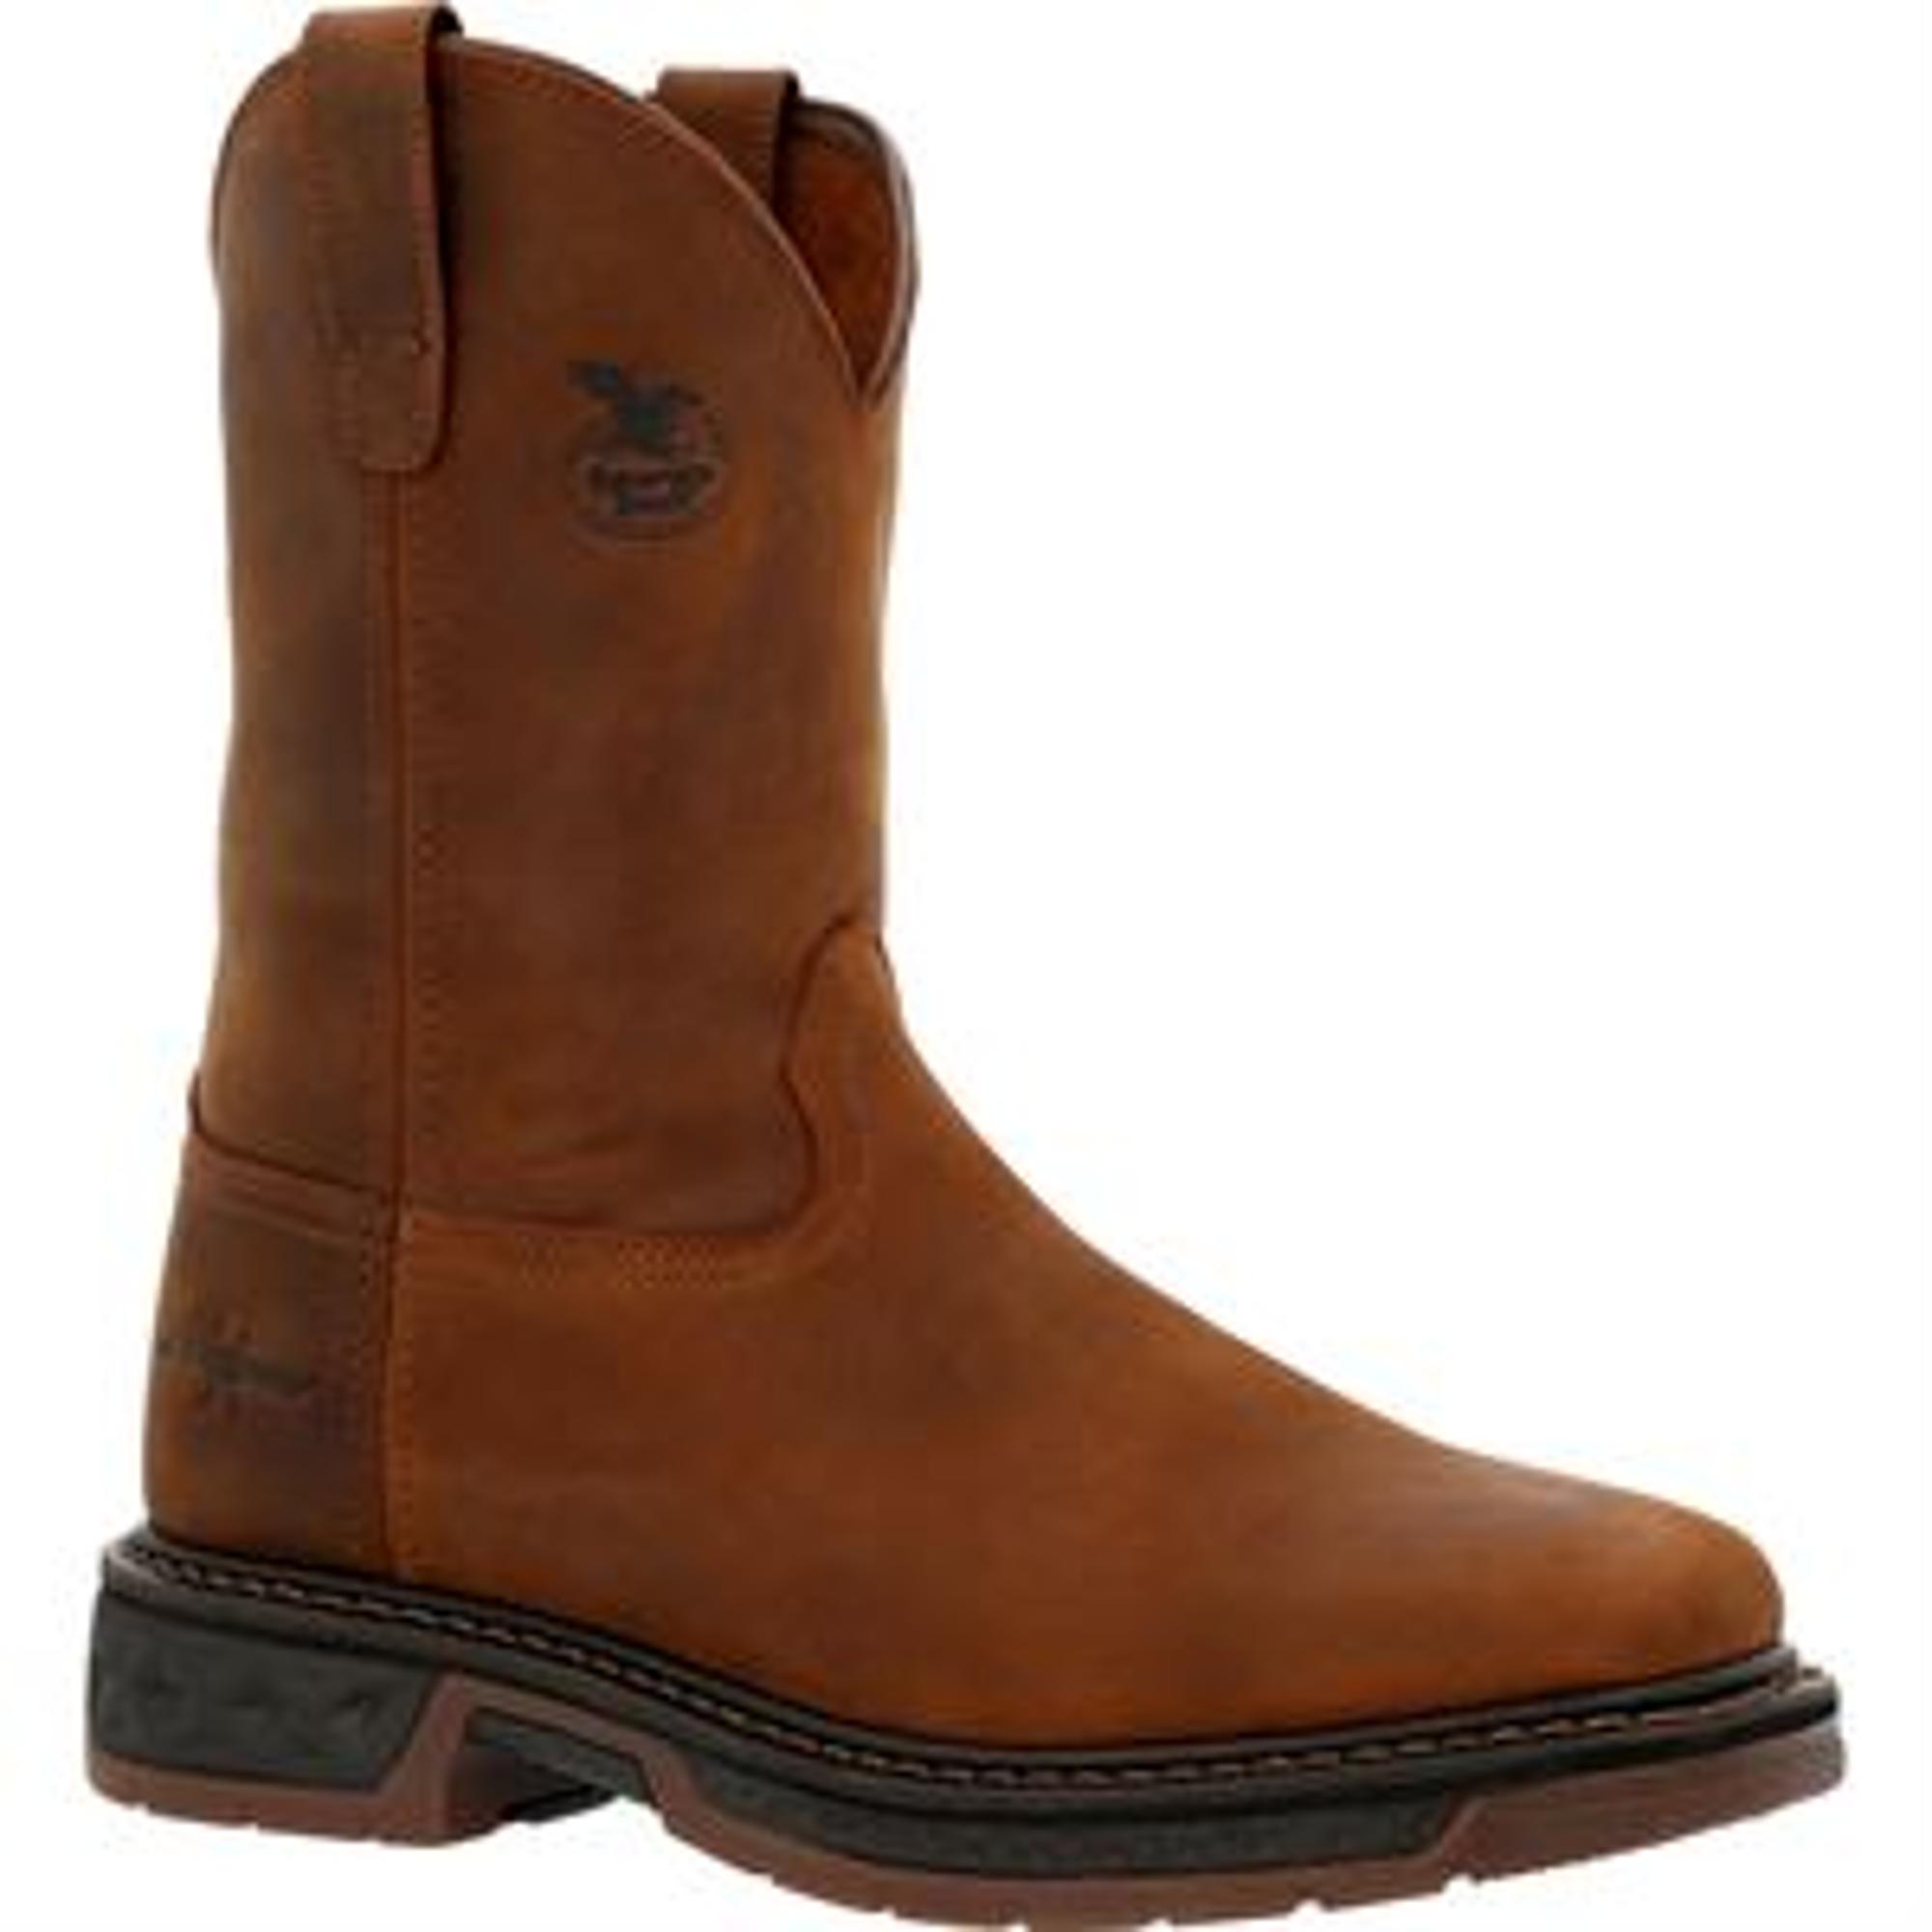 Carbo Tec Lt Square Toe Work Boots